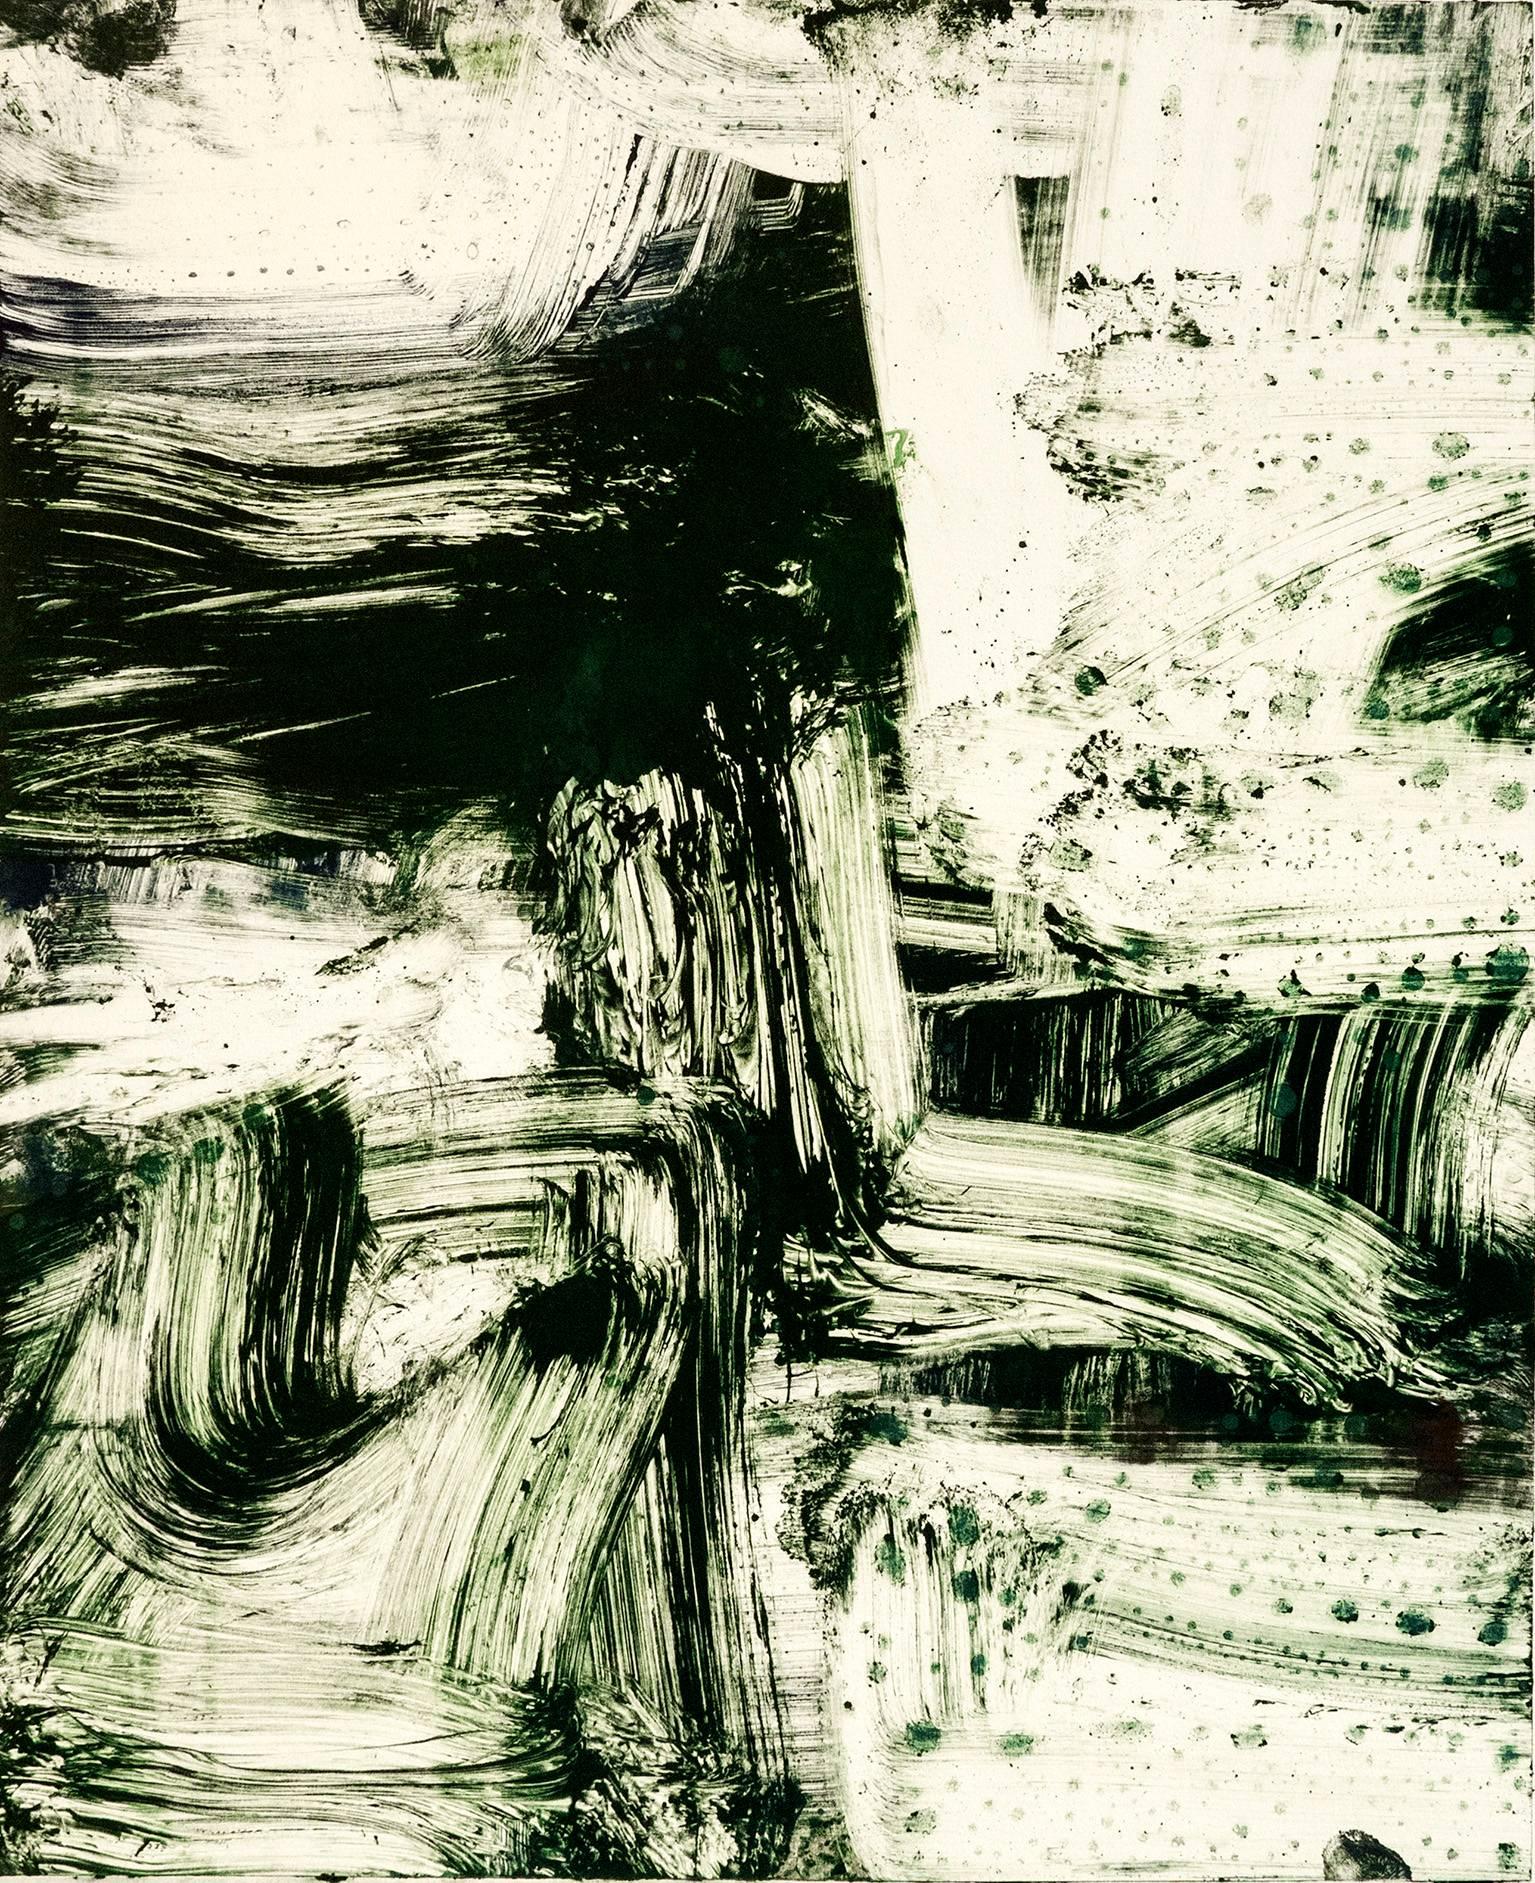 Mark Saltz Abstract Print - “July Series #31, Painterly abstract expressionist monoprint, deep green black.